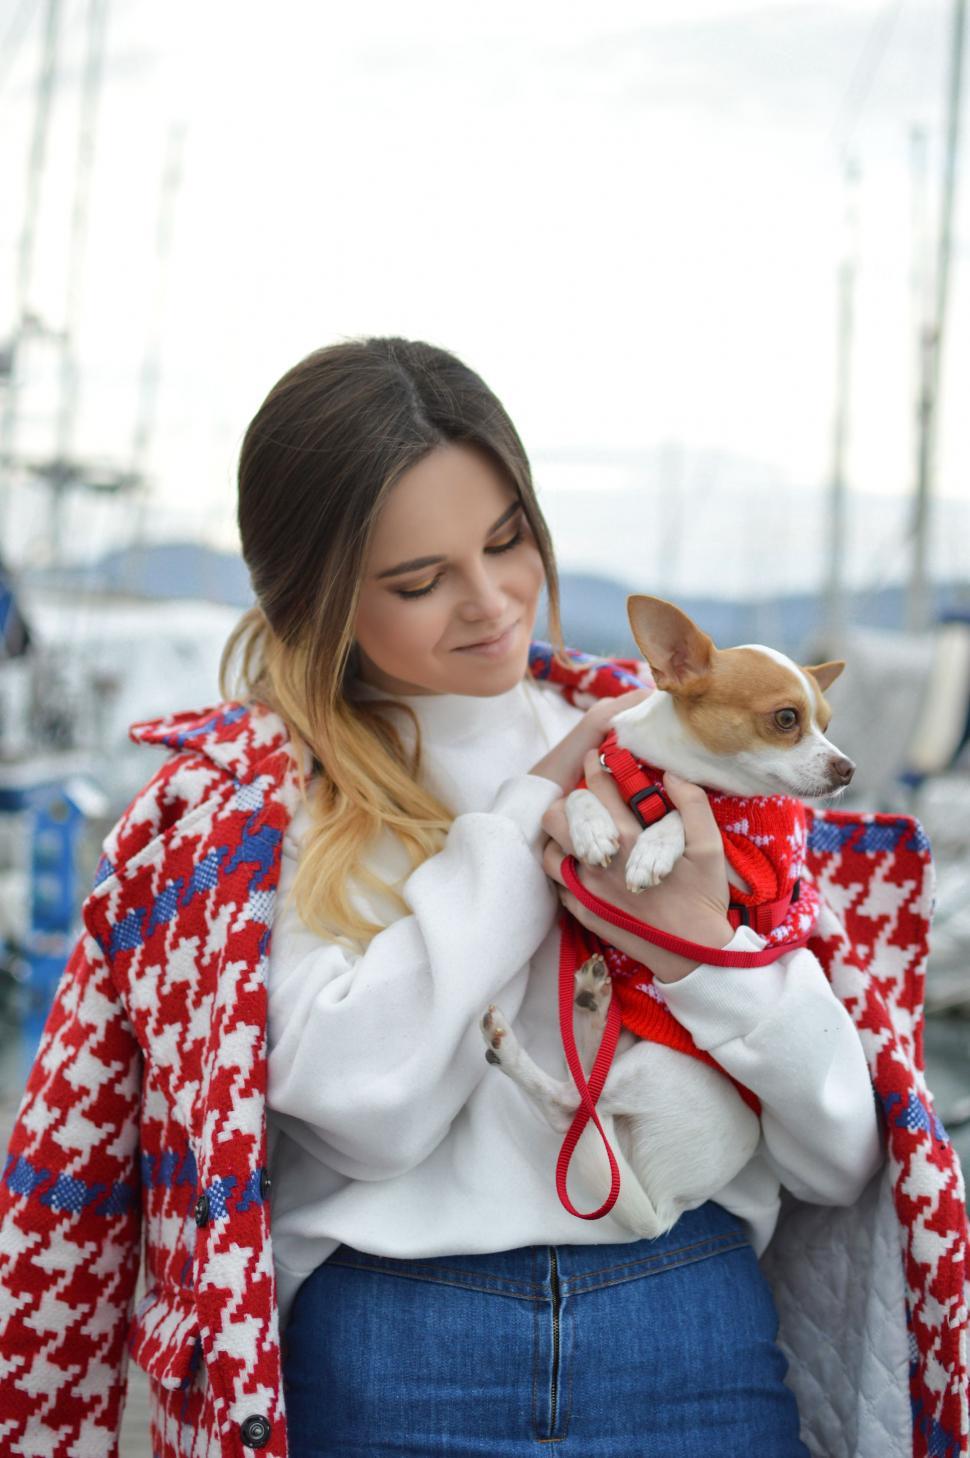 Free Image of Woman Holding Small Dog in Her Arms 